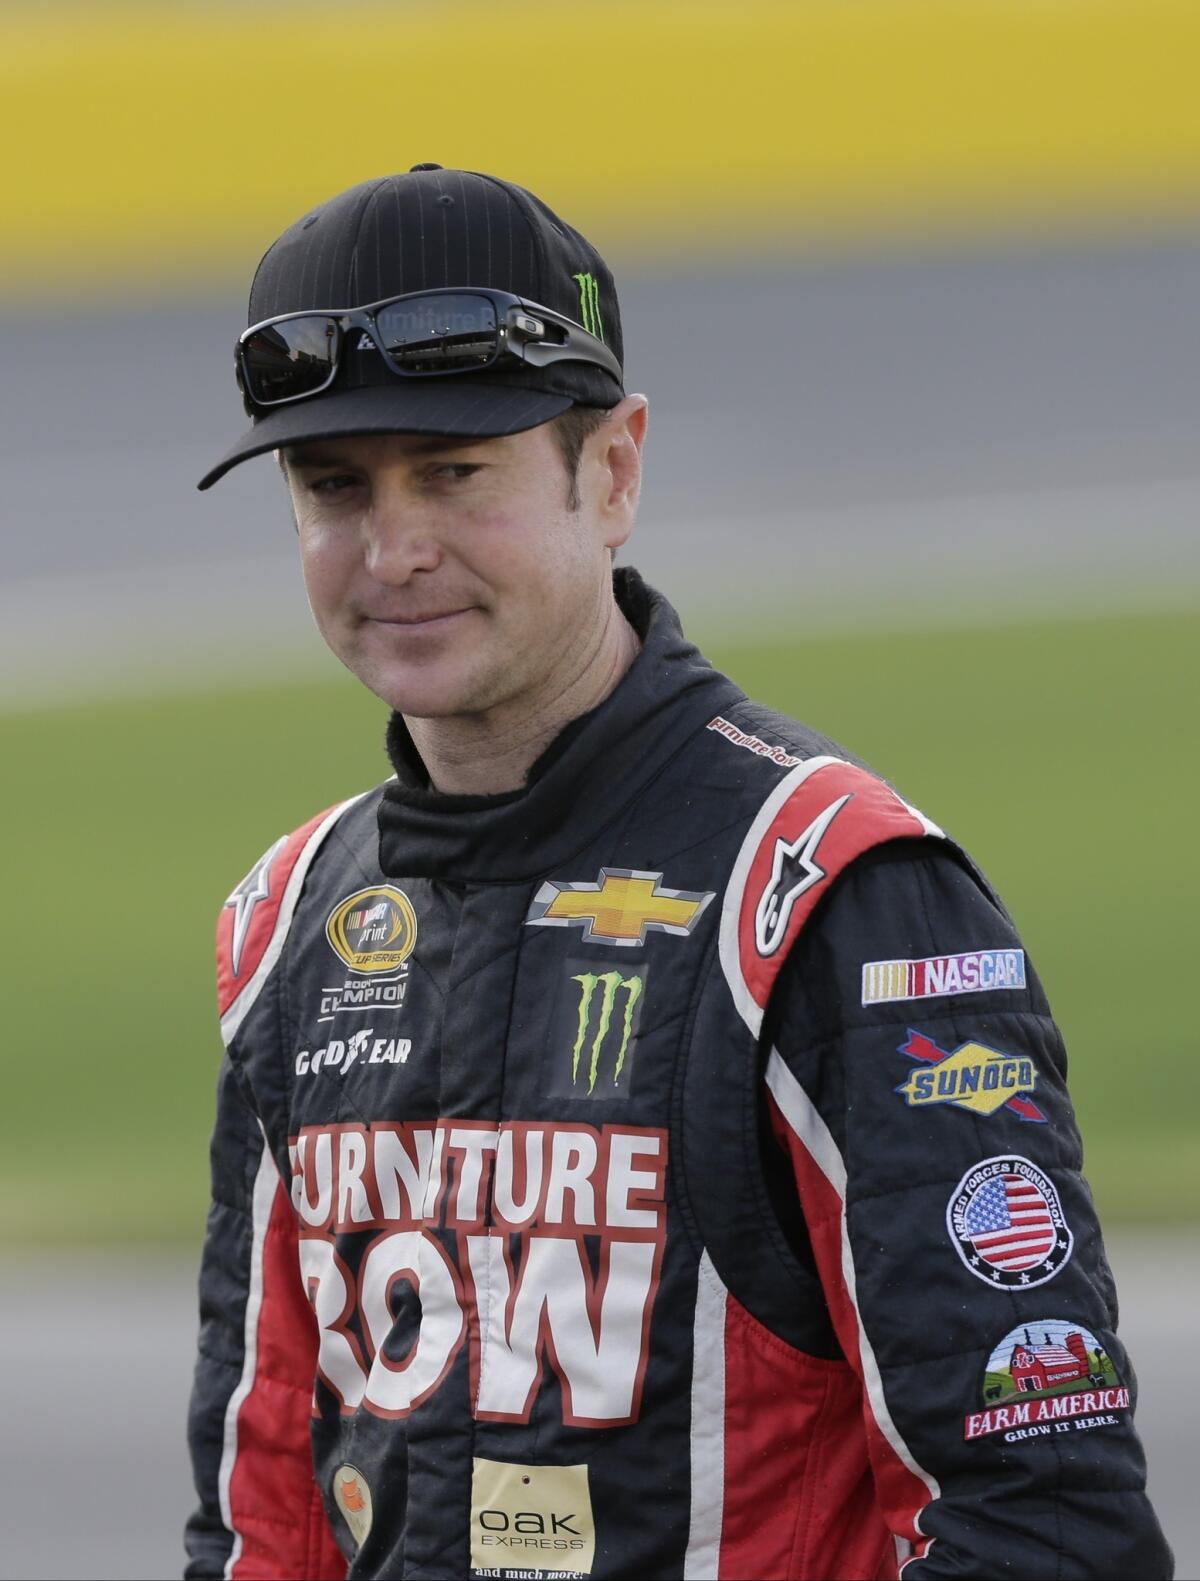 Kurt Busch is interested in possibly racing in the Indianapolis 500 next year.